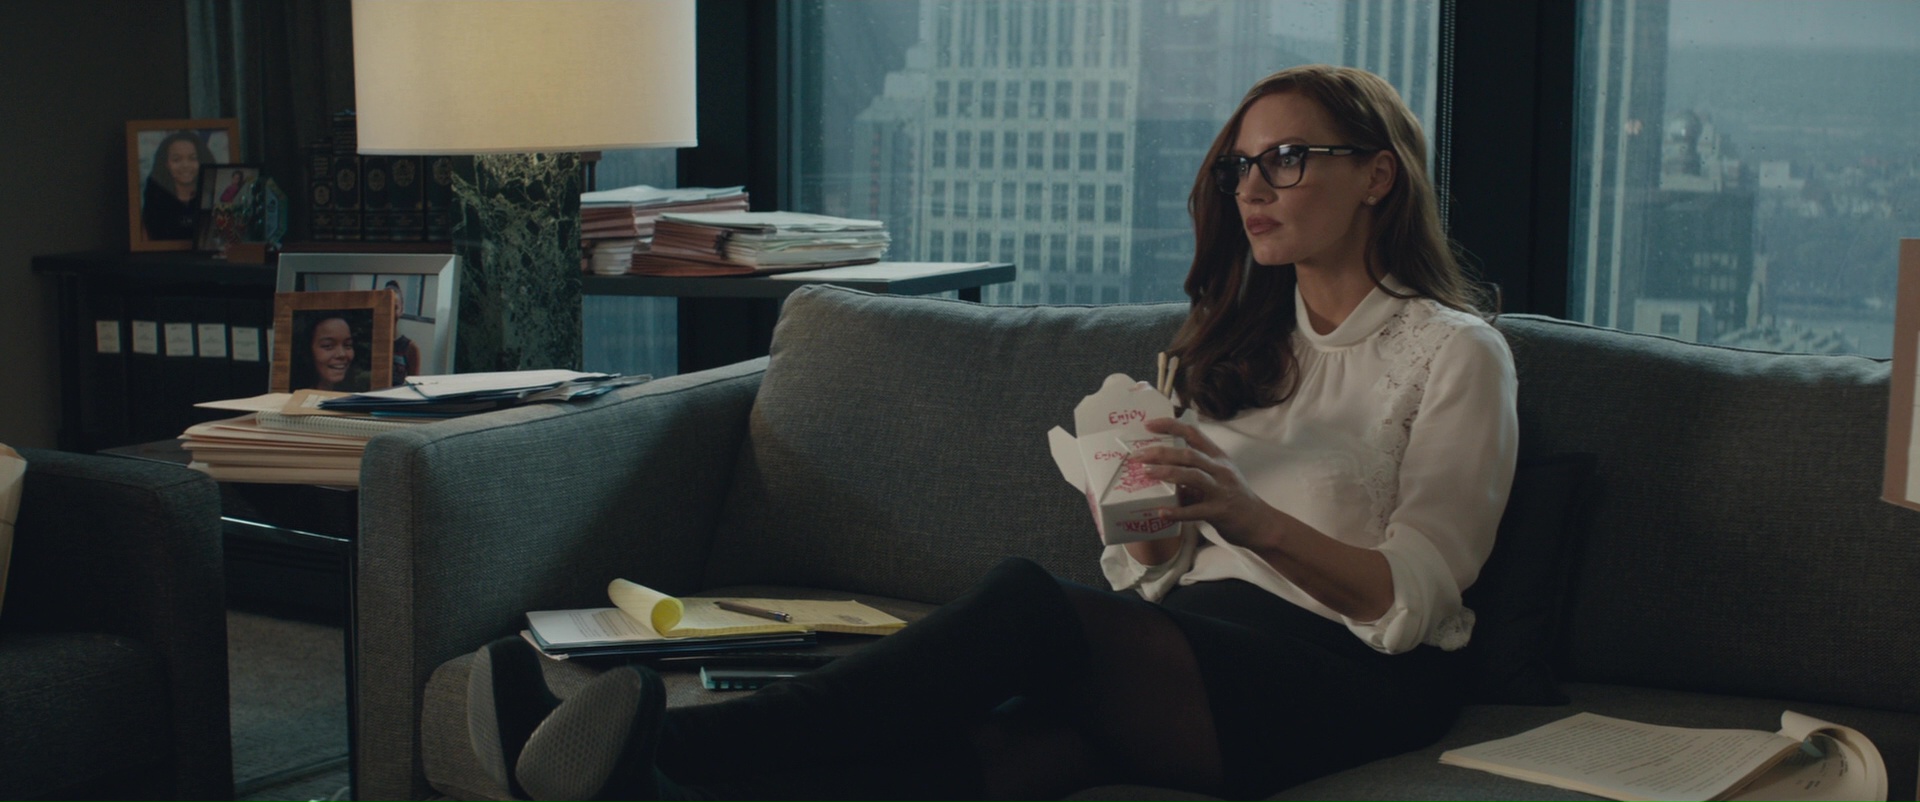 Prada Square Plastic Eyeglasses Worn by Jessica Chastain in Molly’s Game (2017) Movie